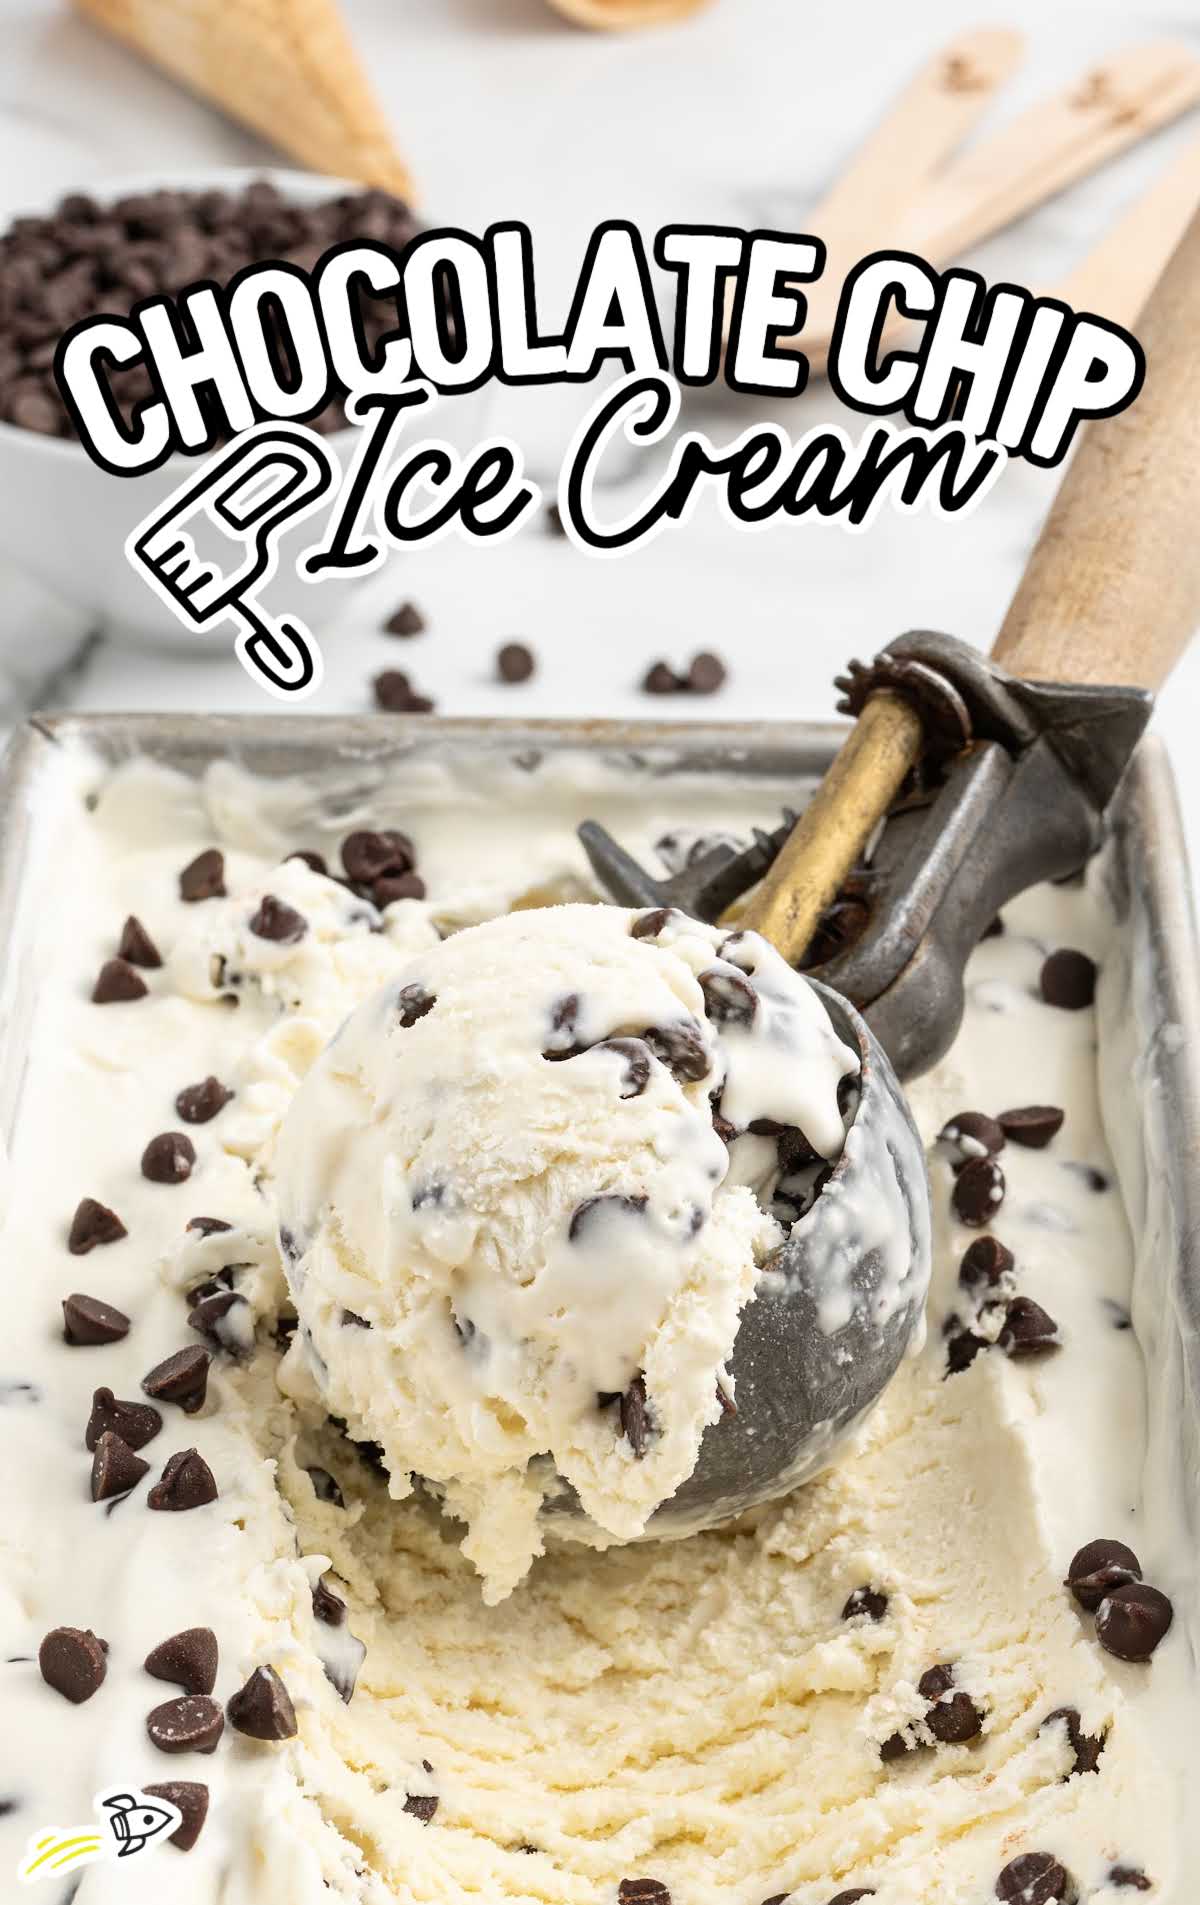 ice cream topped with chocolate chips being scooped out of the pan